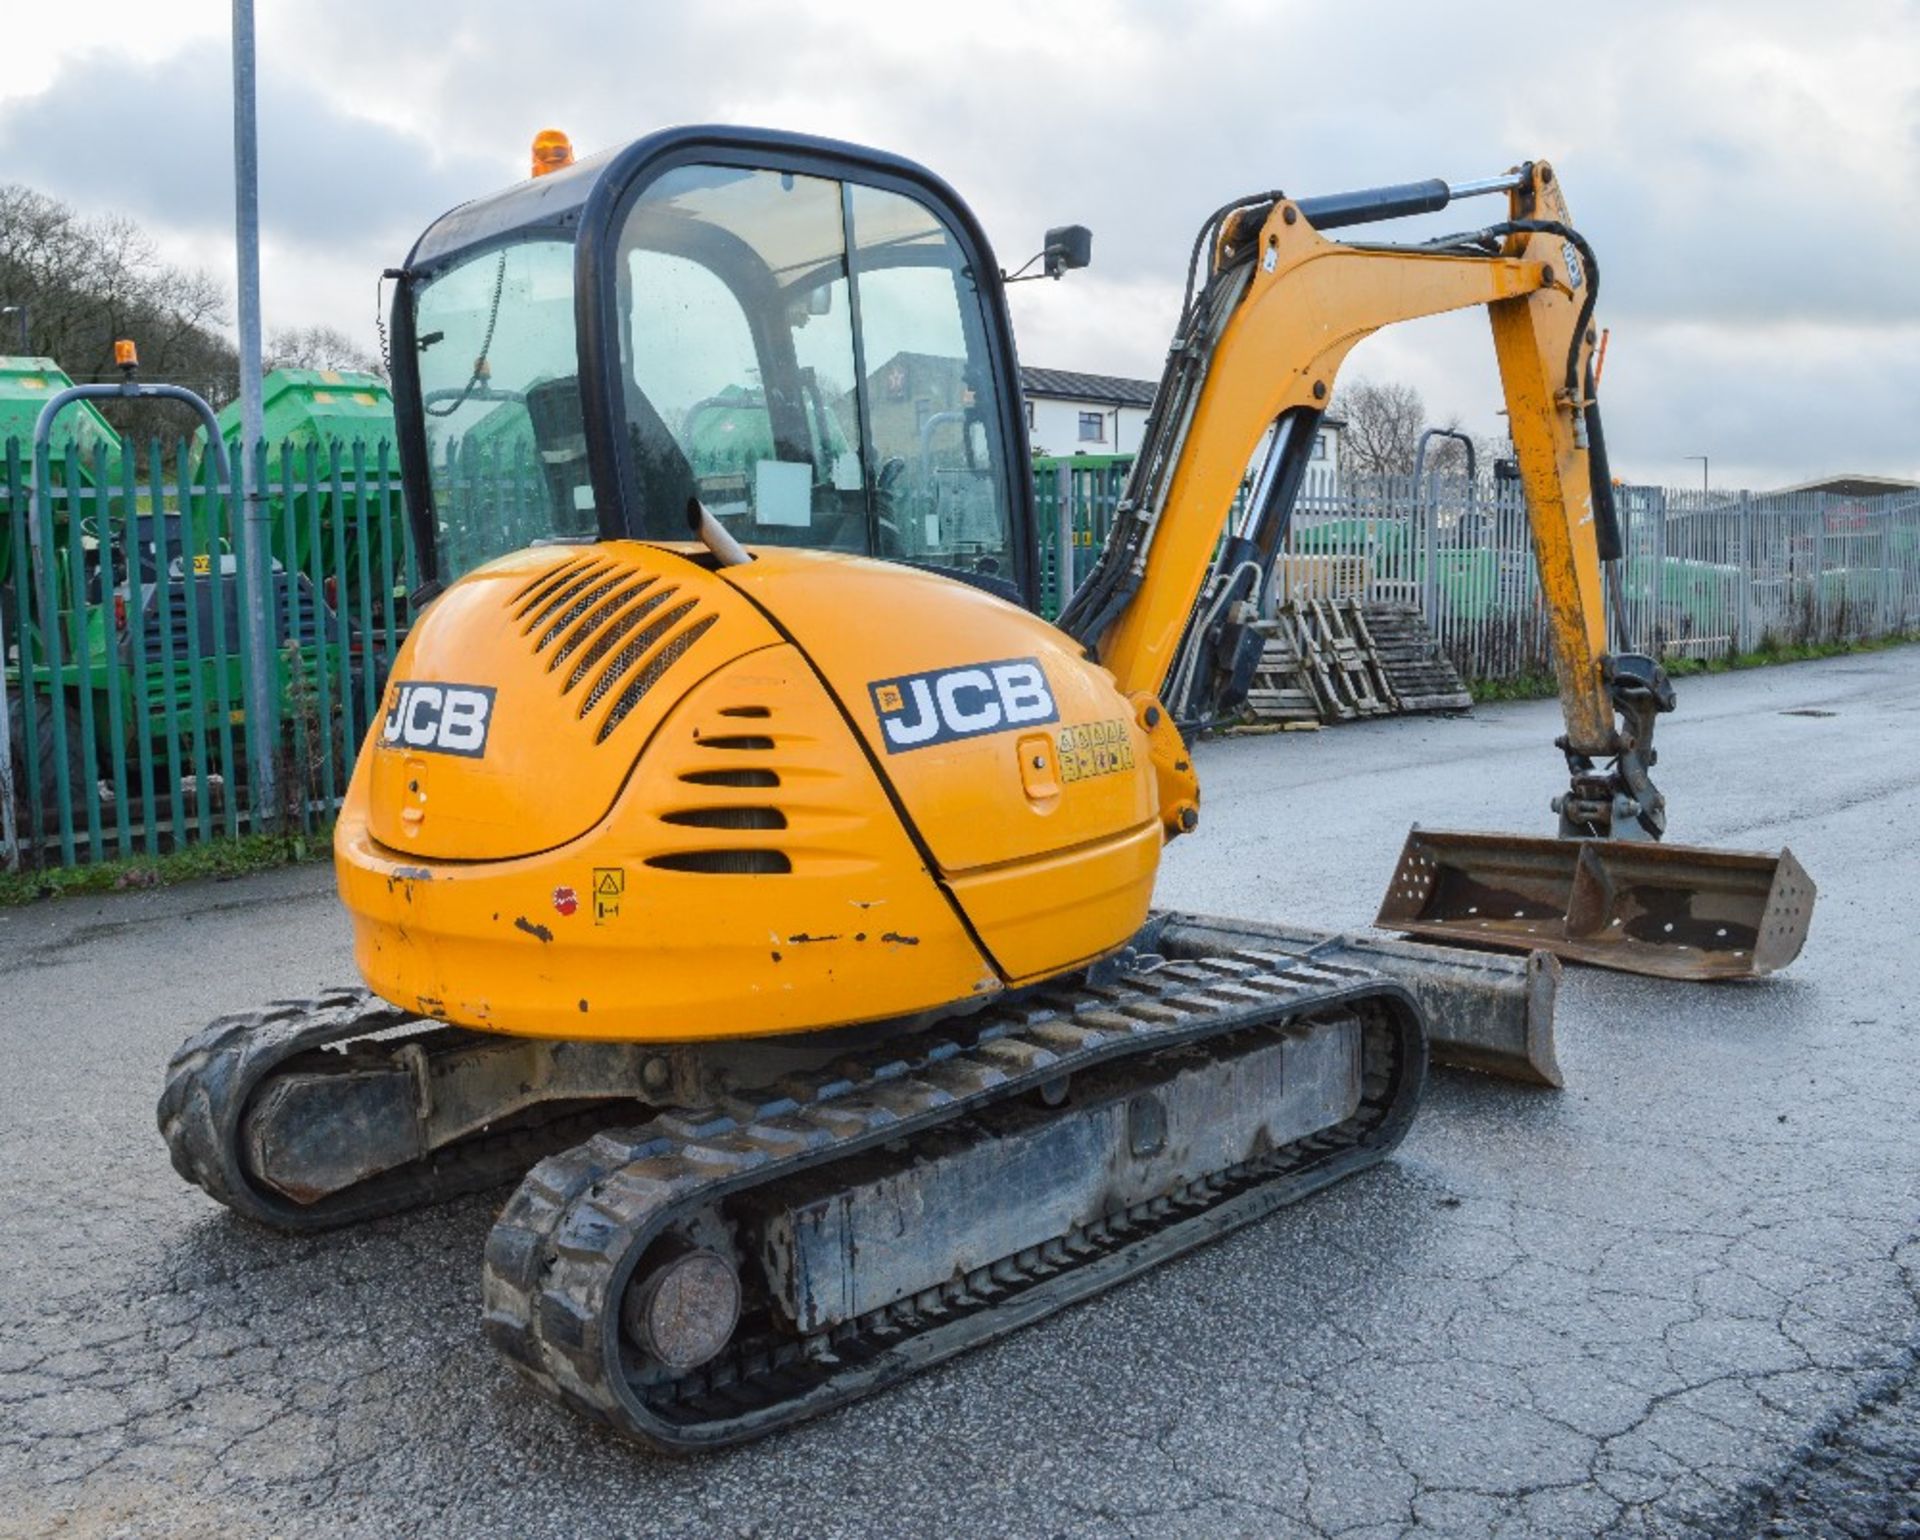 JCB 8050 RTS 5 tonne reduced tail swing rubber tracked mini excavator
Year: 2011
S/N: 1741659 - Image 3 of 12